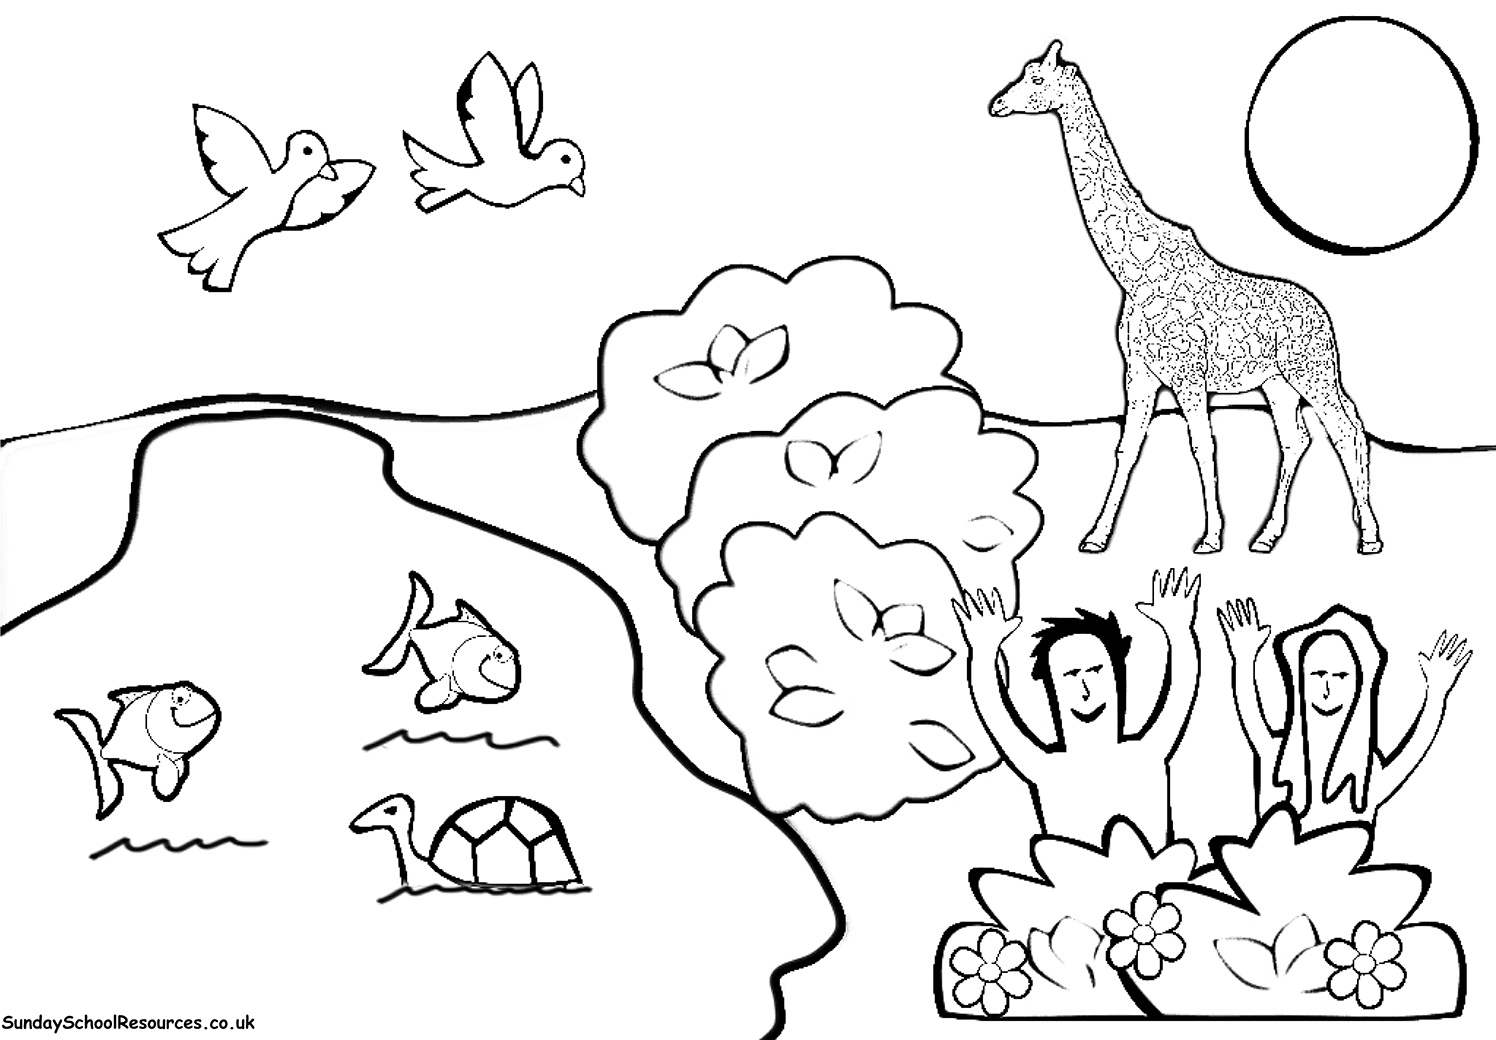 Amazing of Coloring Creation About Creation Coloring Page #2739